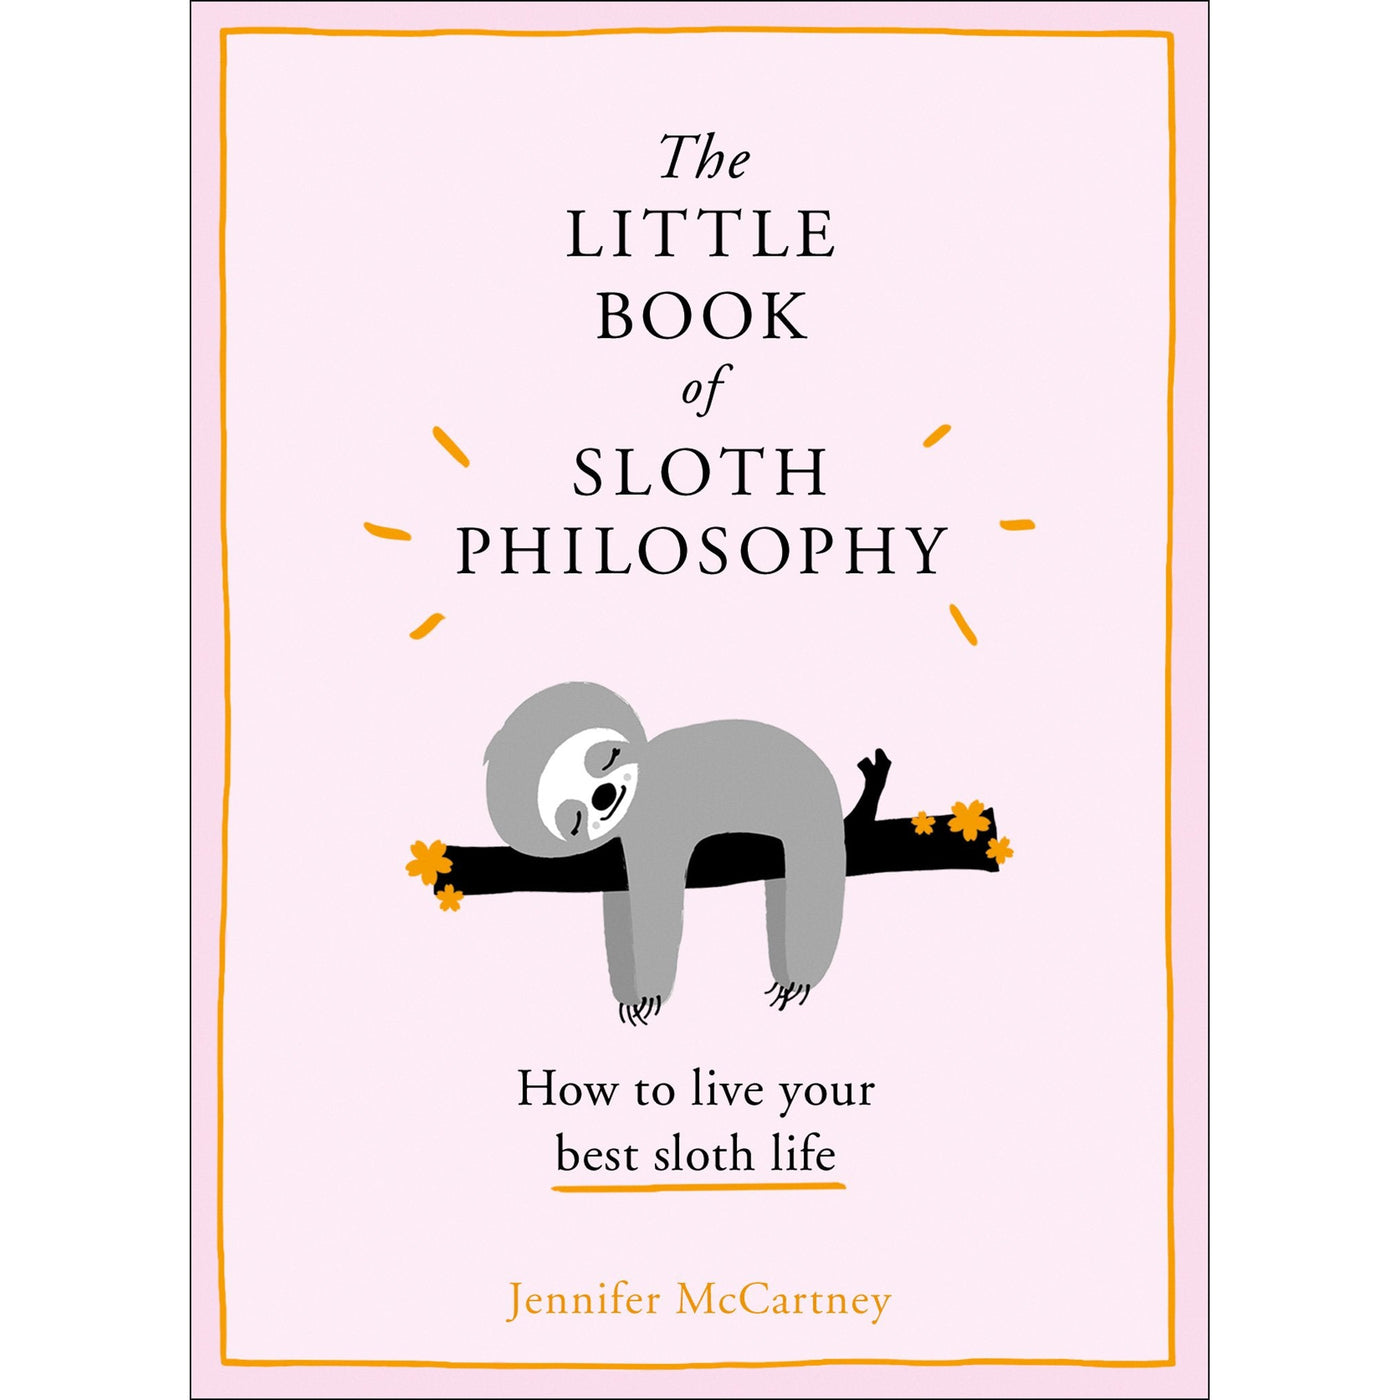 The Little Book of Sloth Philosophy book